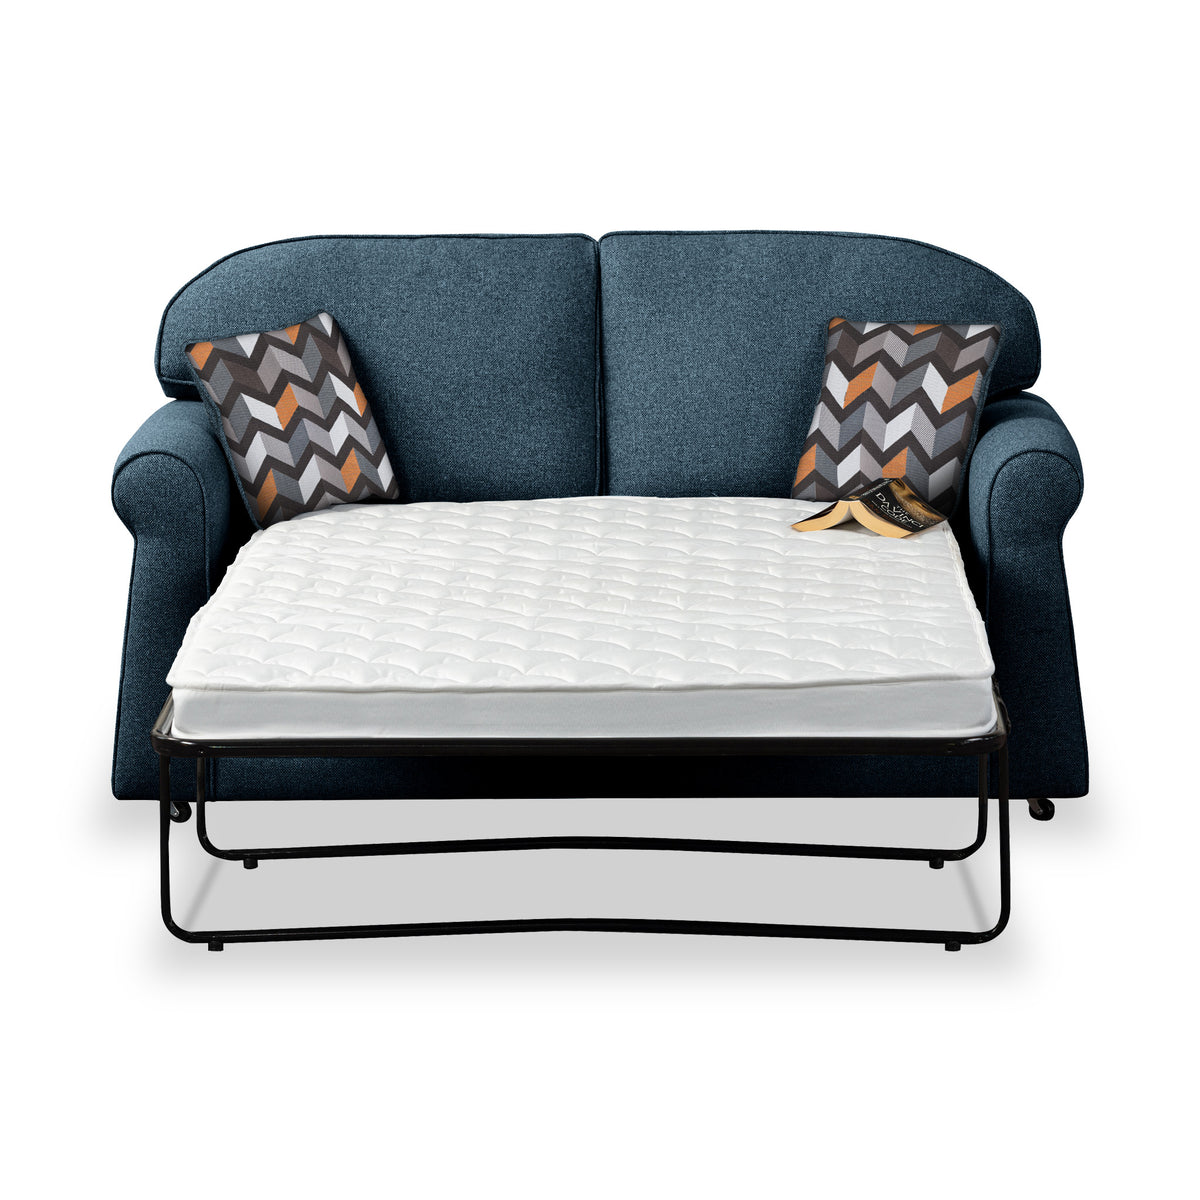 Giselle Midnight Soft Weave 2 Seater Sofabed with Charcoal Scatter Cushions from Roseland Furniture